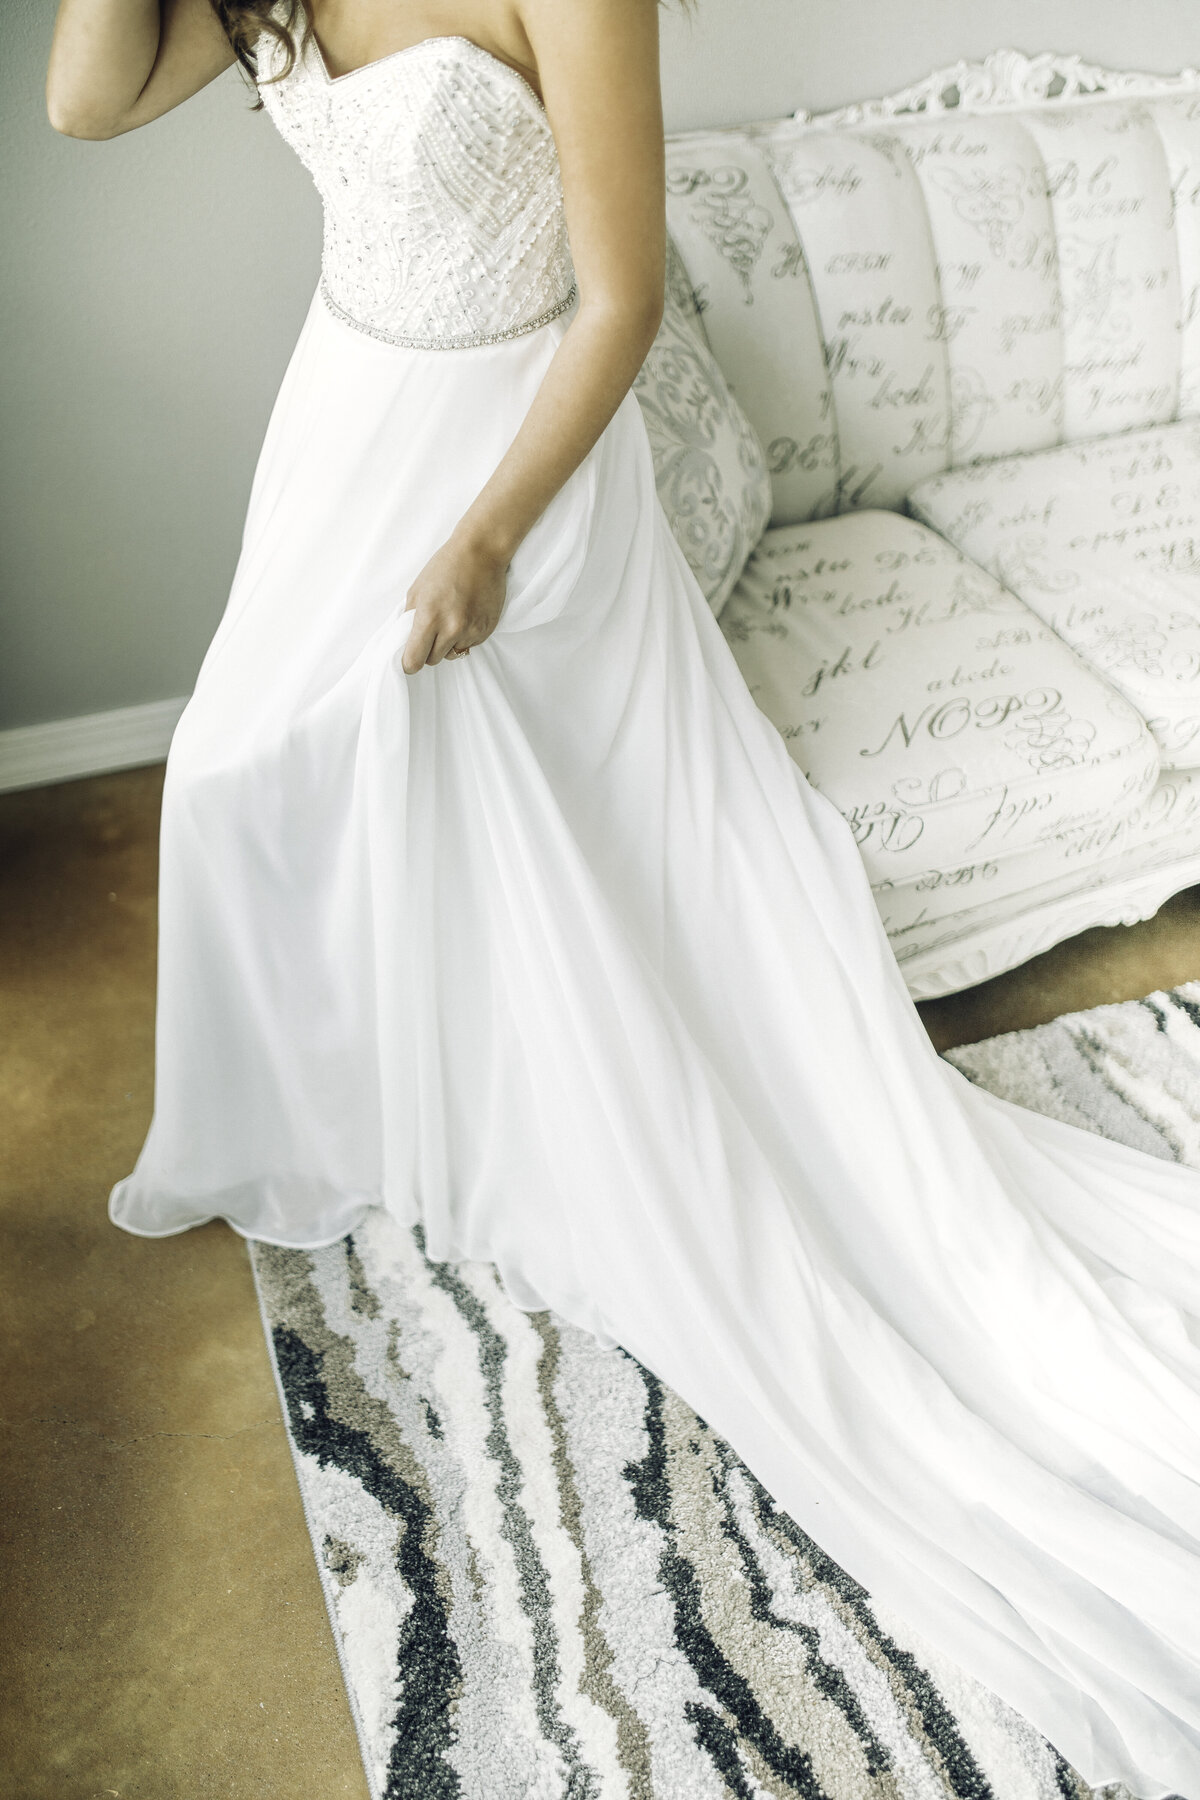 Wedding Photograph Of Bride SHowing Her White Wedding Gown Los Angeles